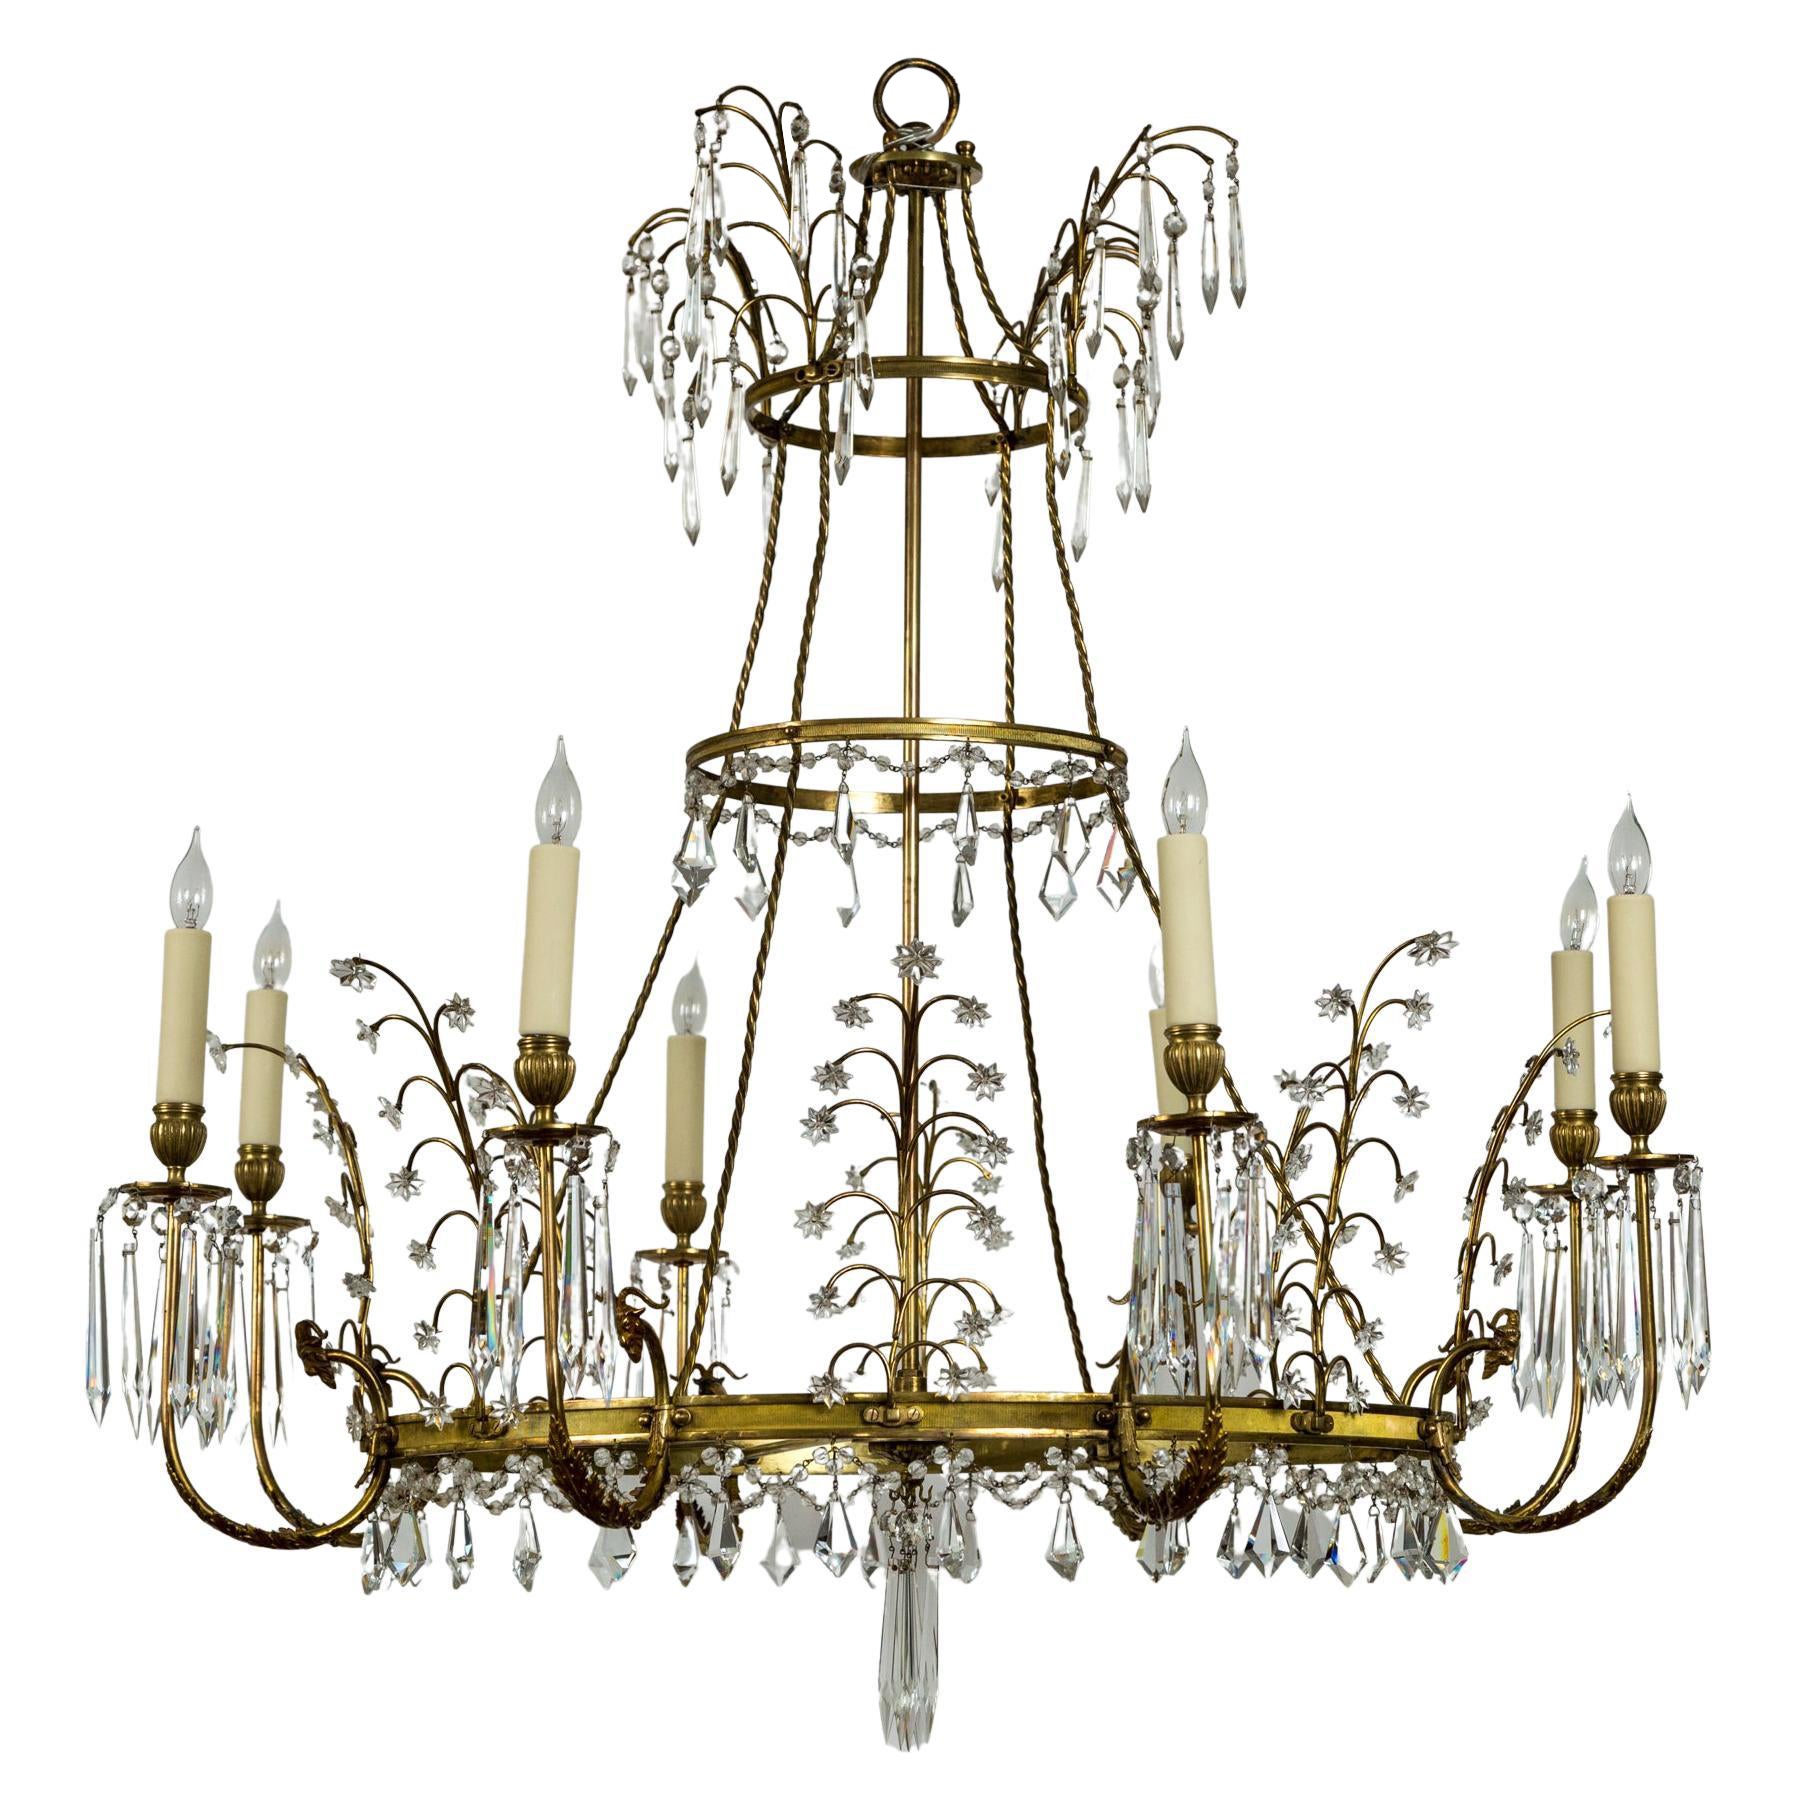 Early 20th Century Baltic Russian Neoclassical Brass and Crystal Chandelier For Sale